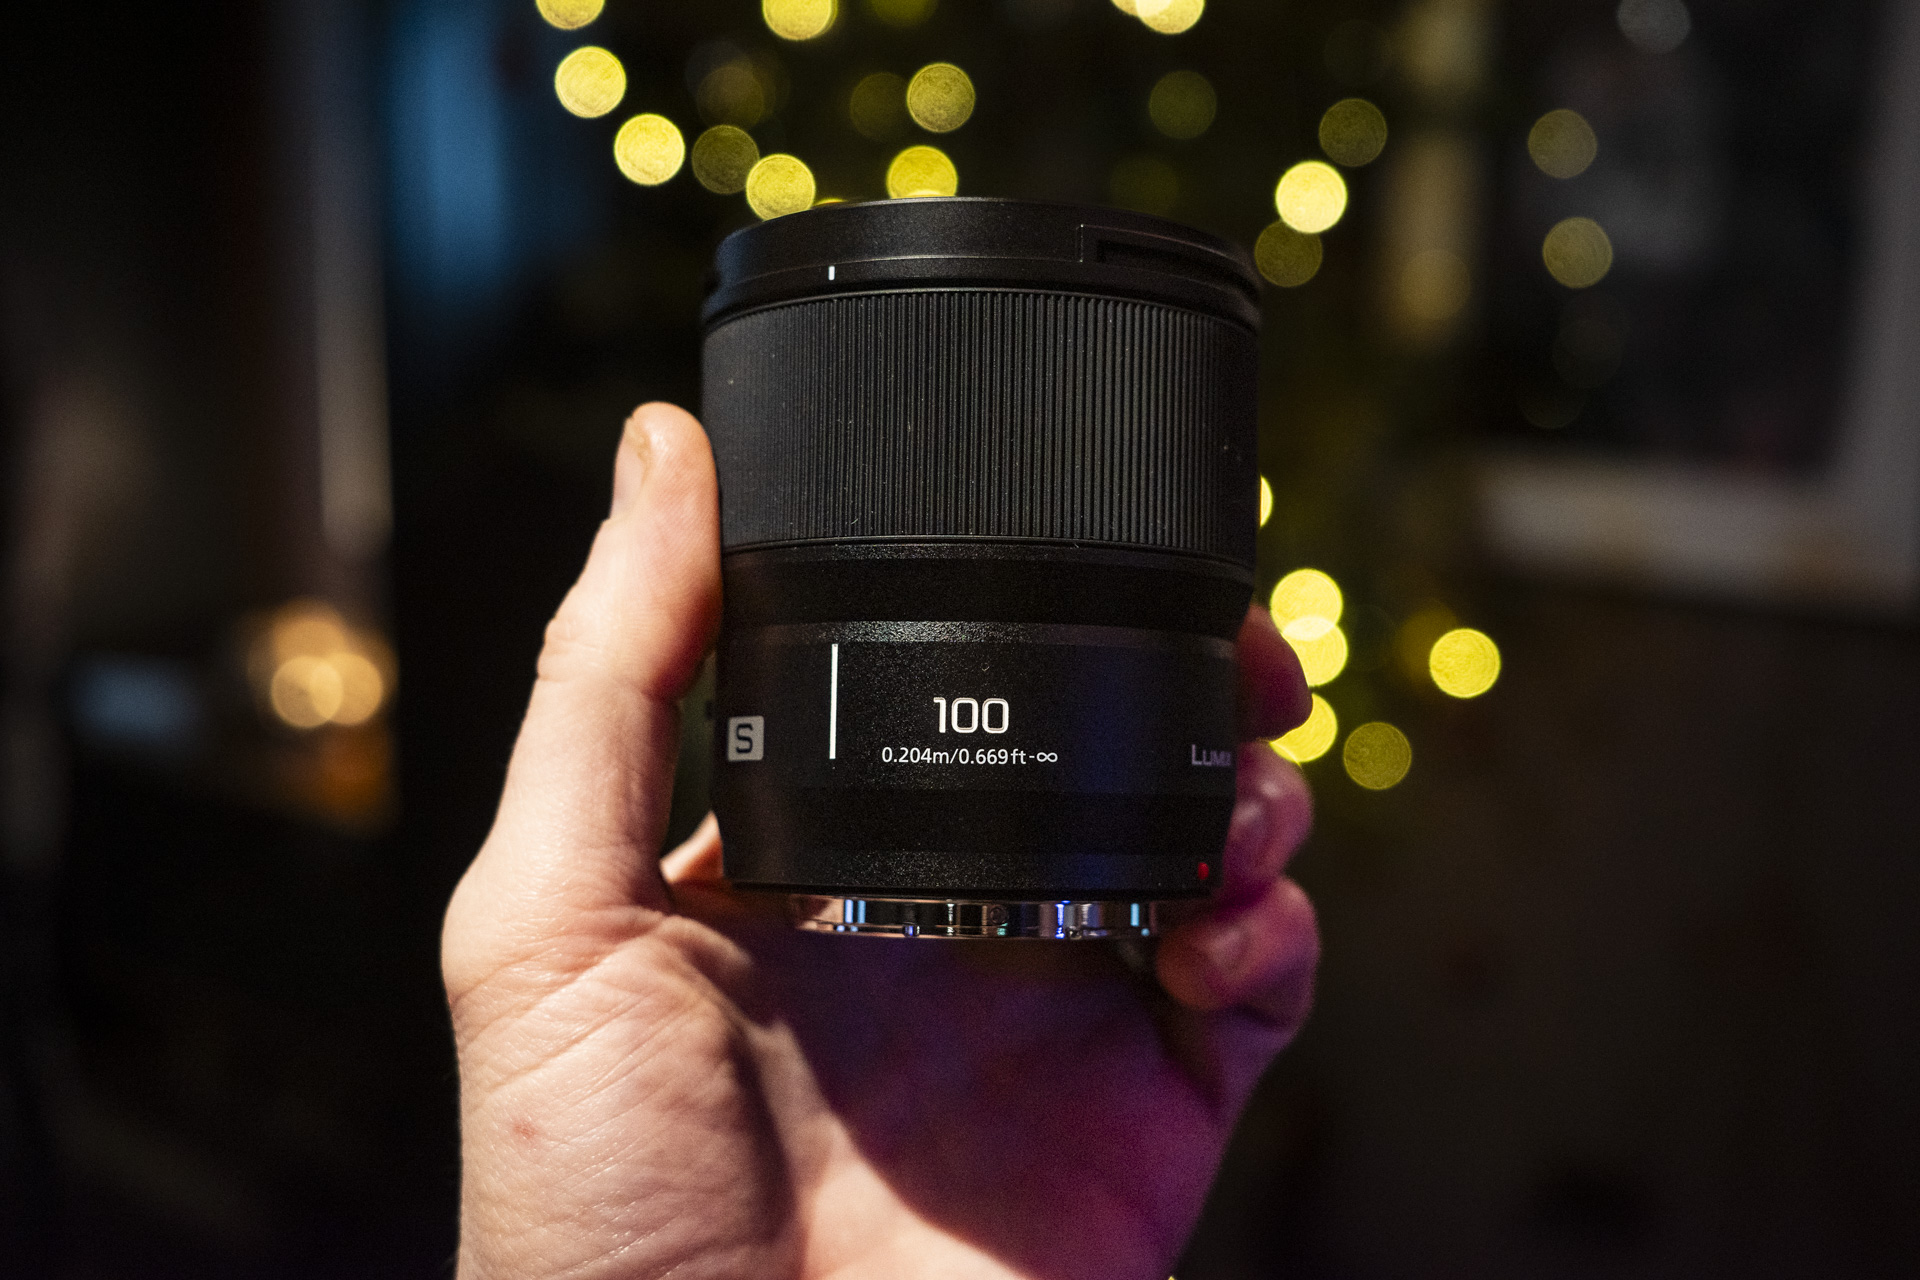 Panasonic Lumix S 100mm F2.8 Macro lens in the hand with Christmas lights background